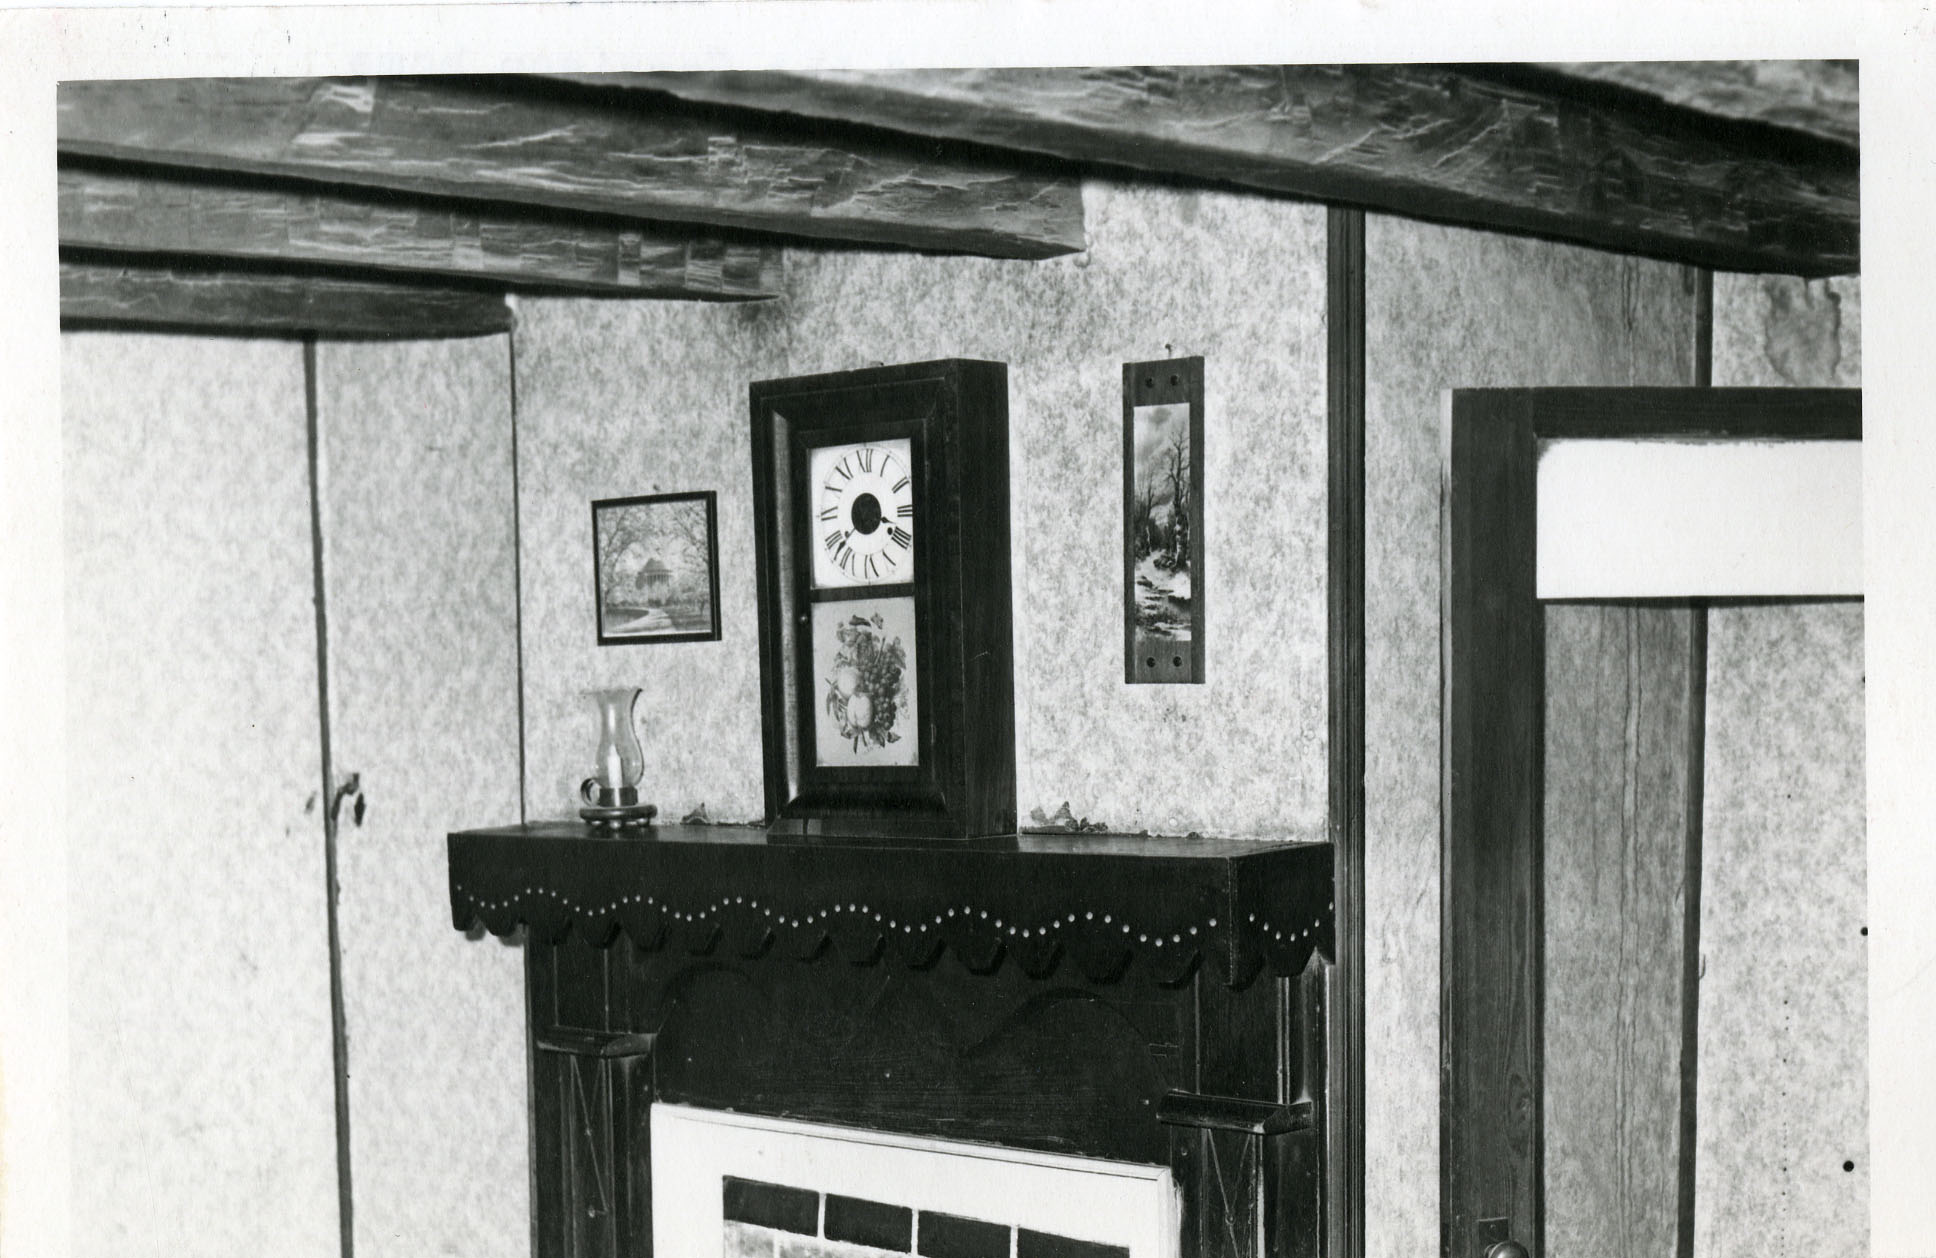 Garrison Home interior: India Hook Section of York County, S.C. Courtesy of the WU Pettus Archives - 2023